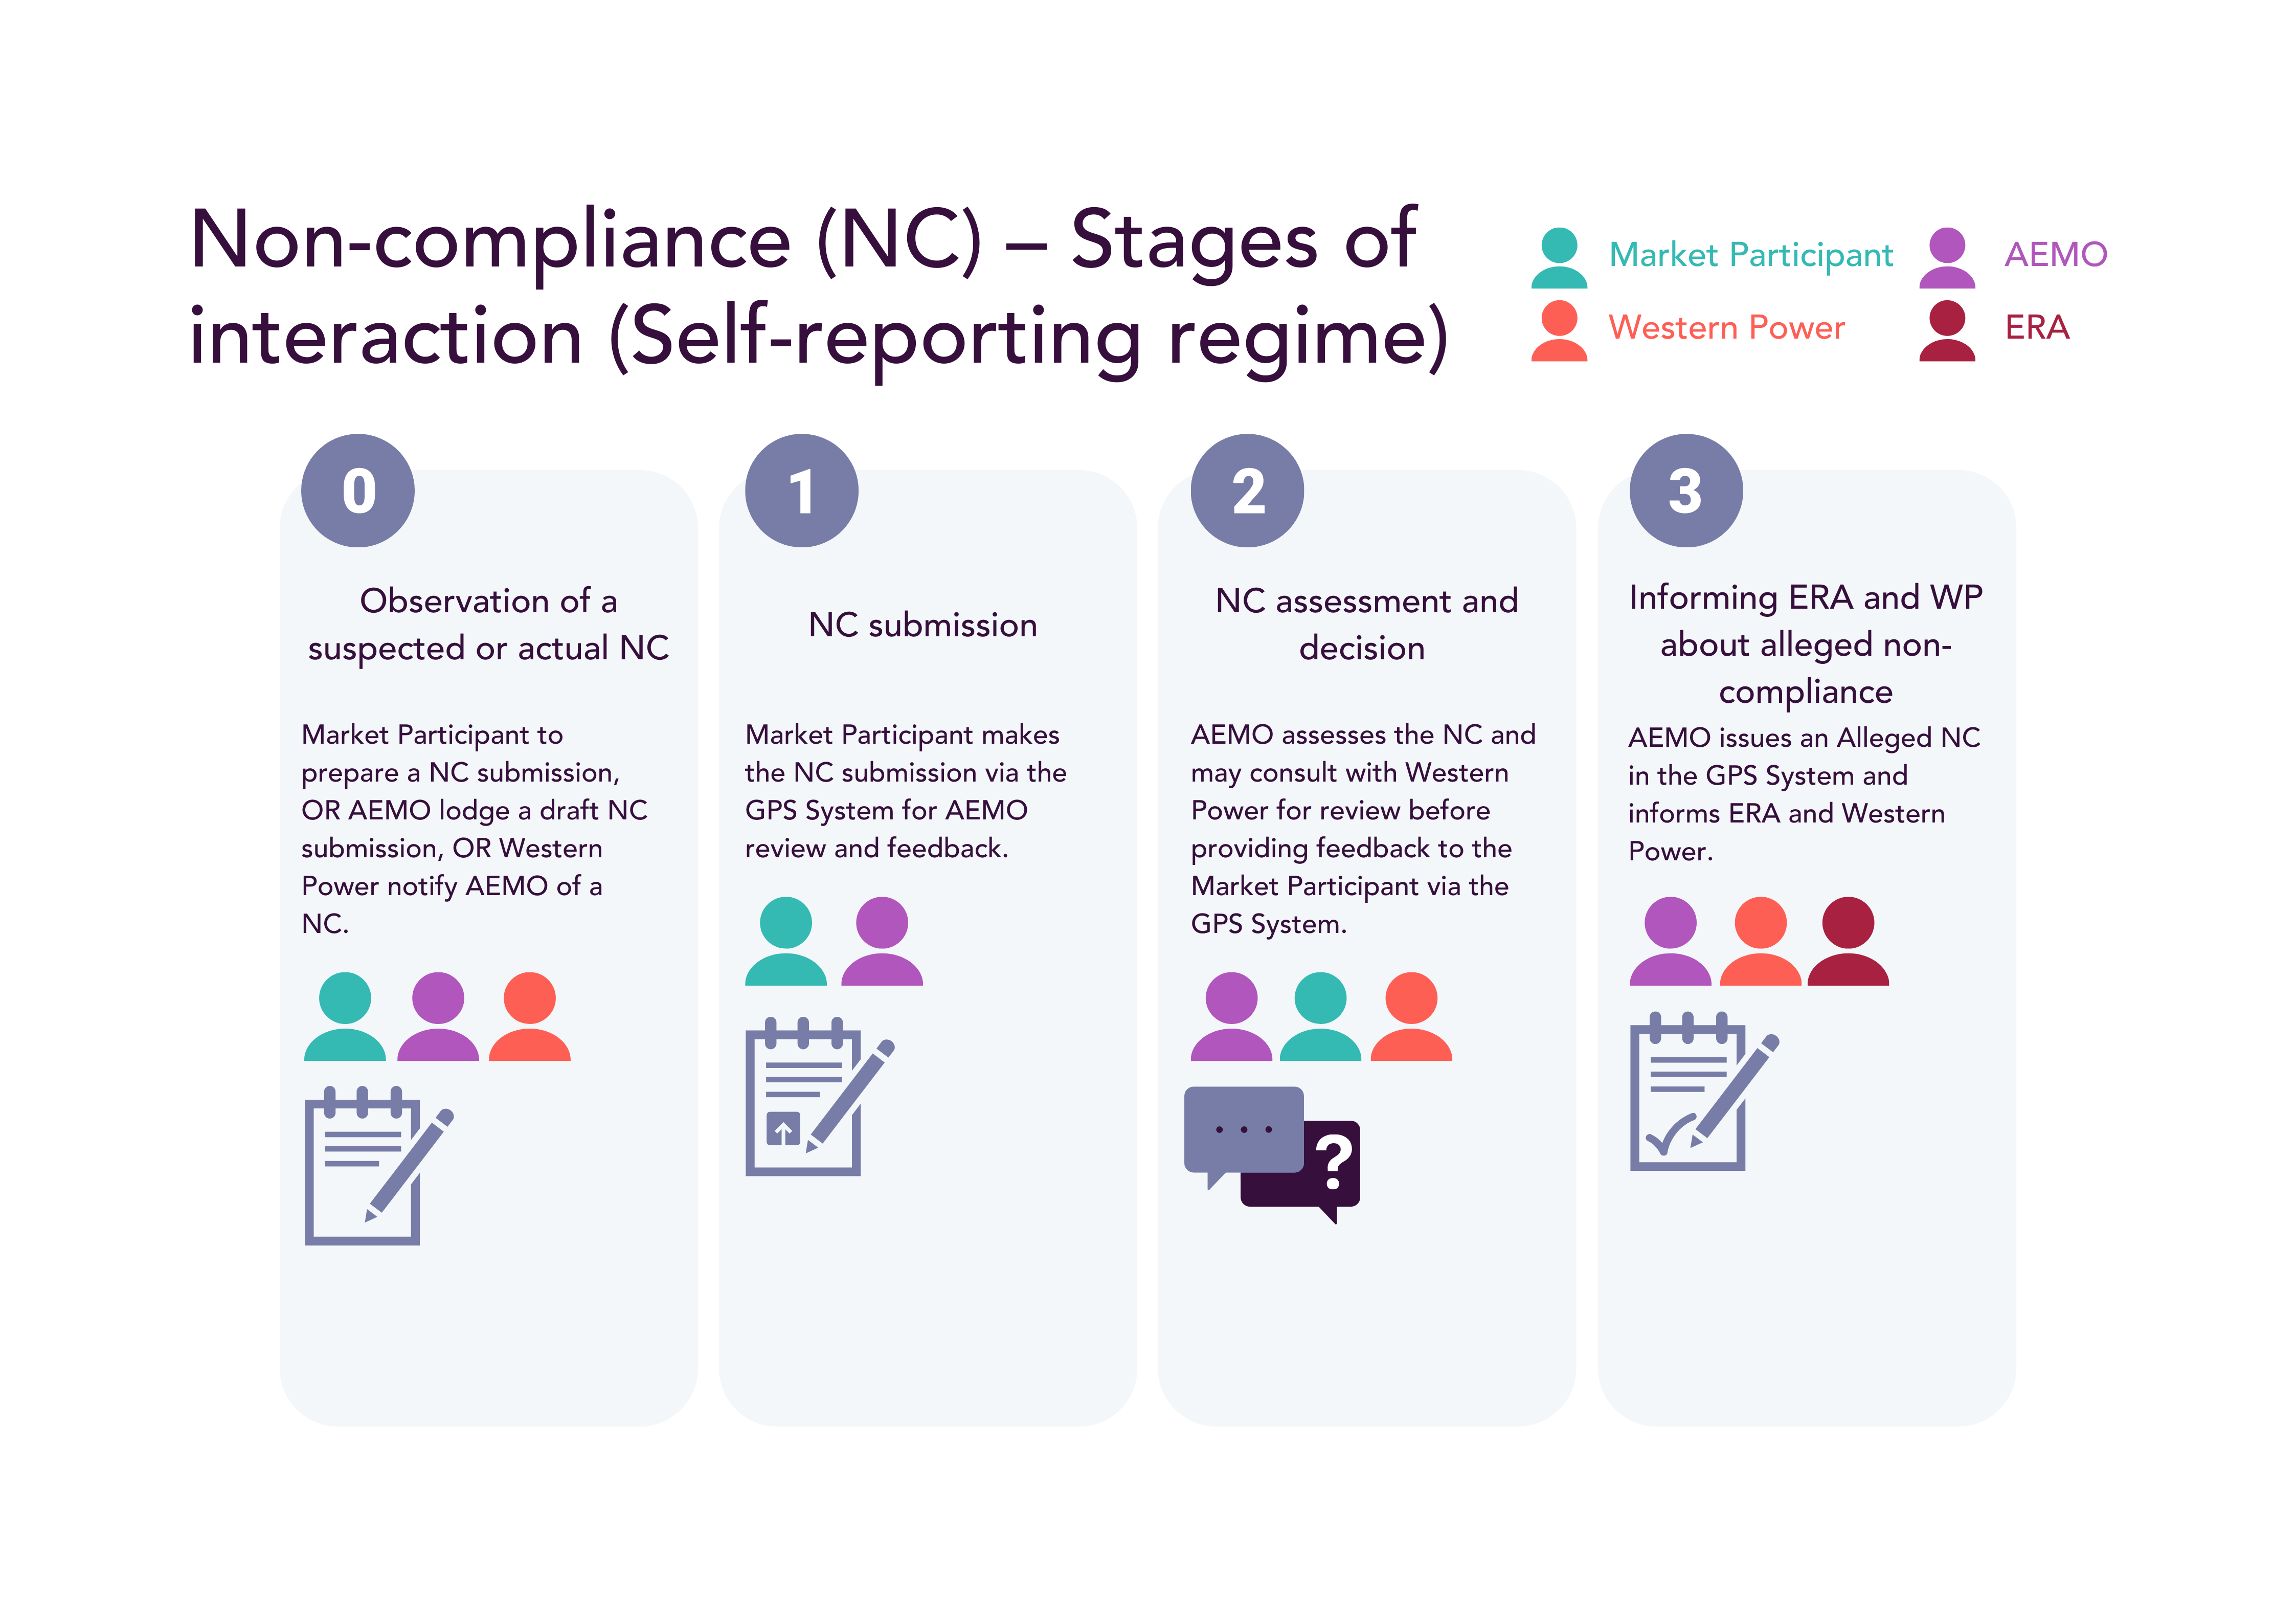 Non-compliance - Stages of interaction​ image